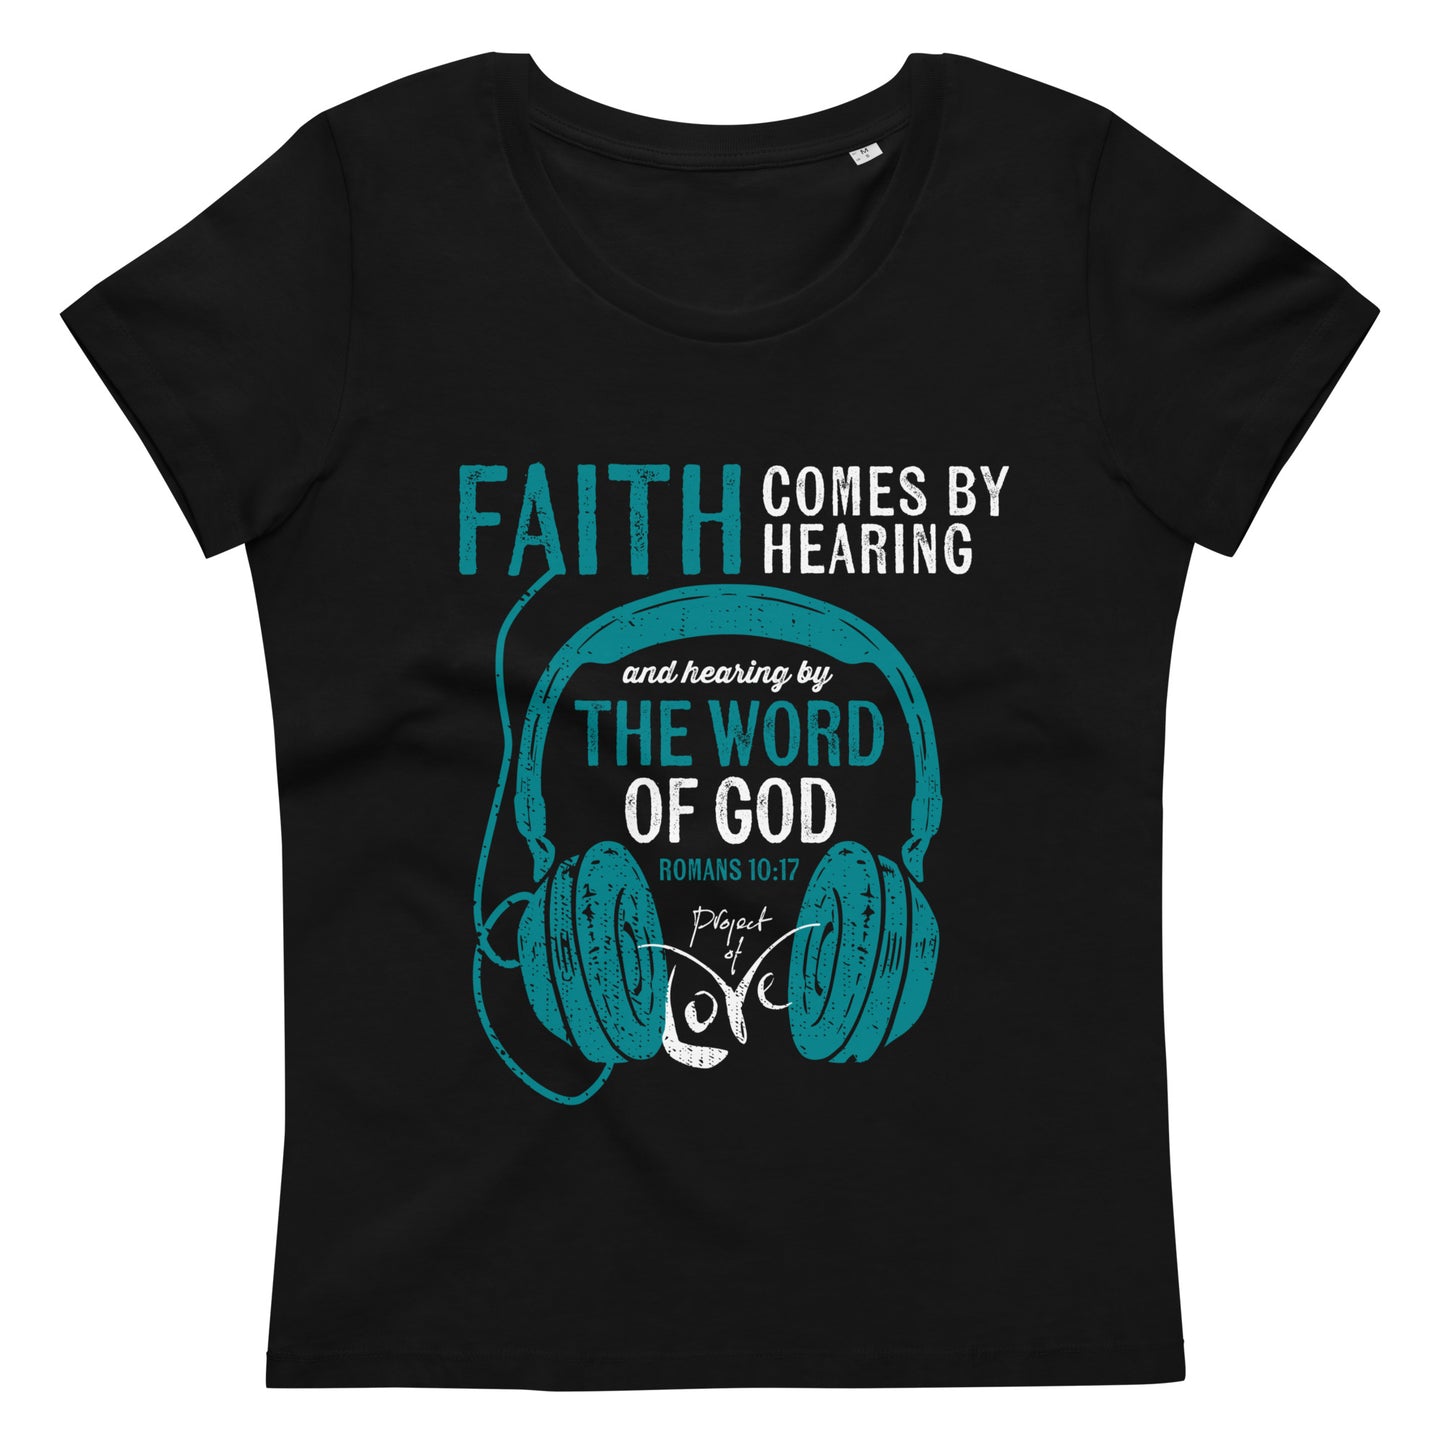 Women's eco T-Shirt Romans 10:17 'Faith Comes by Hearing'